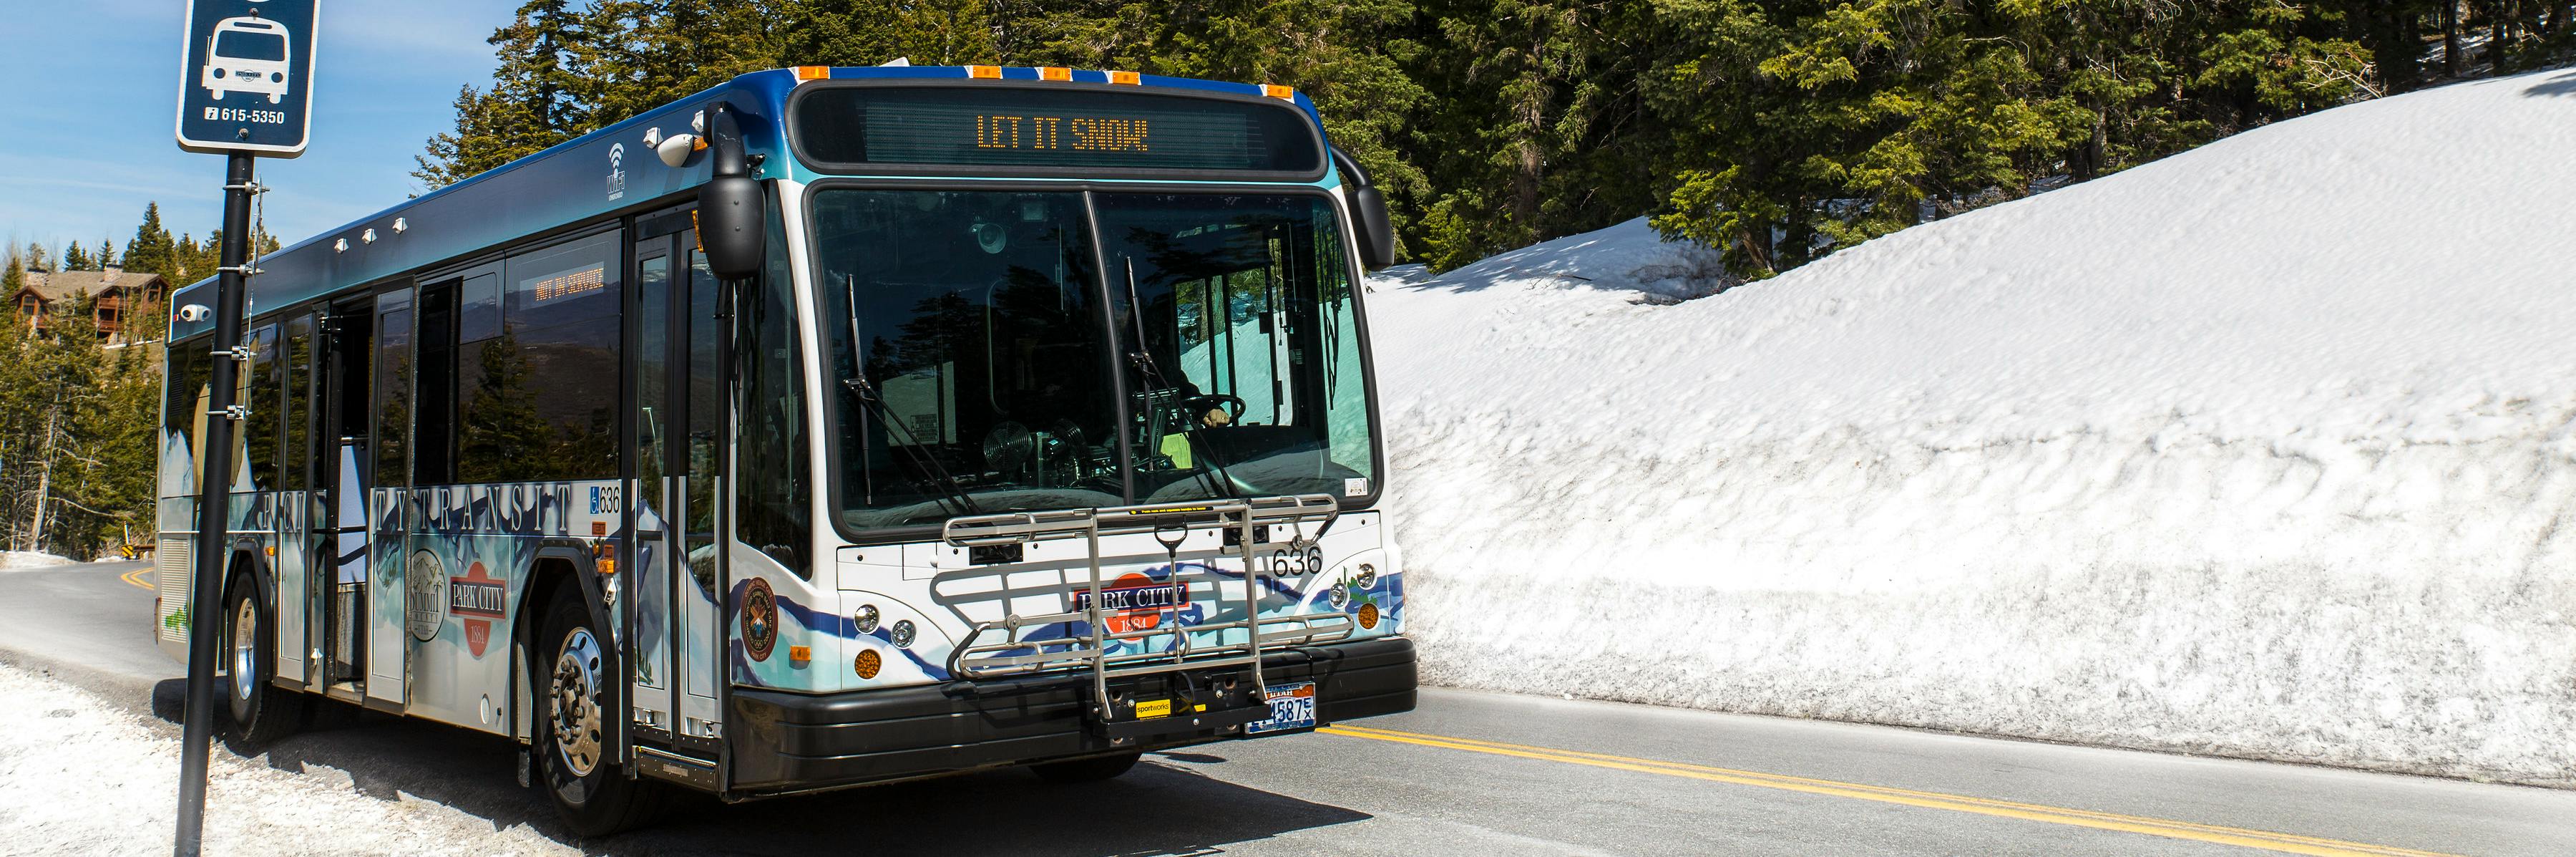 Image depicts a Park City Transit bus driving on state road 224 in the springtime.